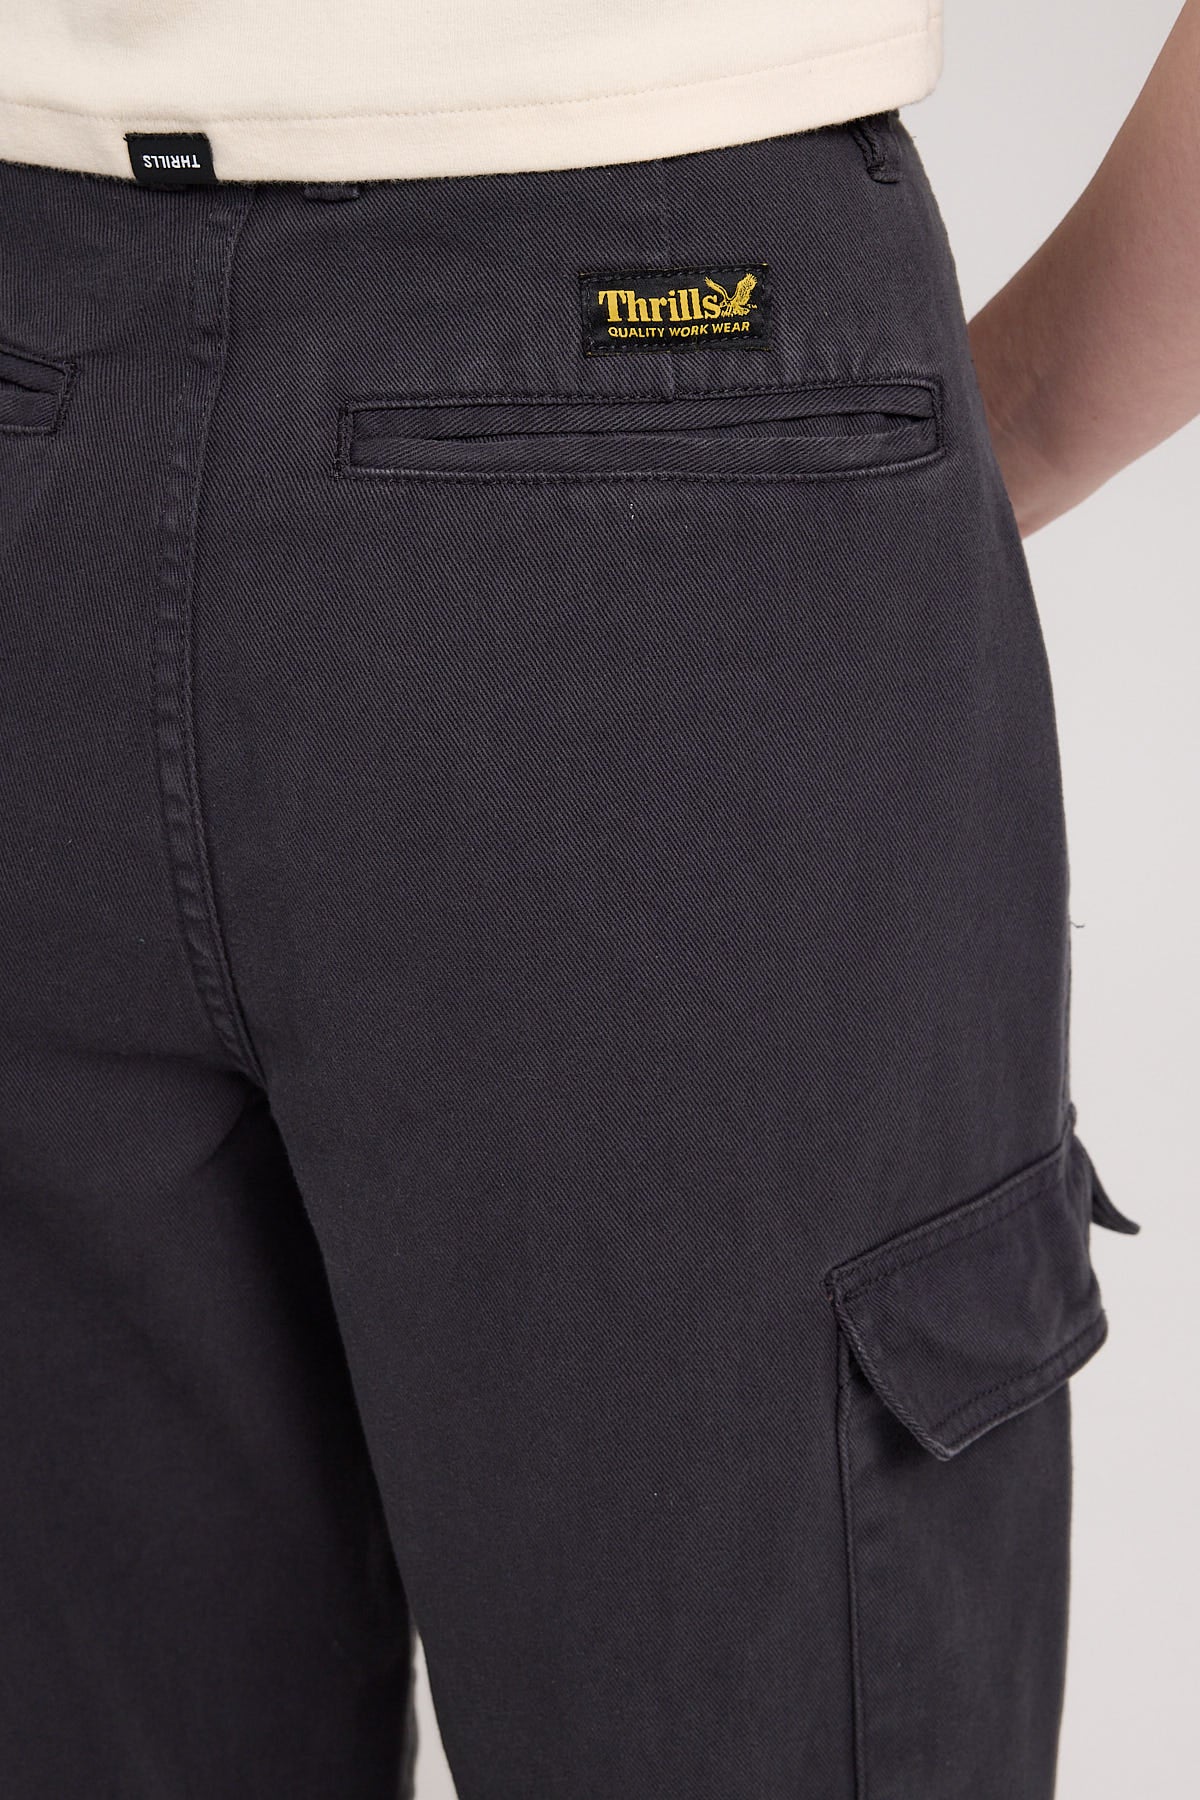 Thrills Union Baggy Pant Charcoal